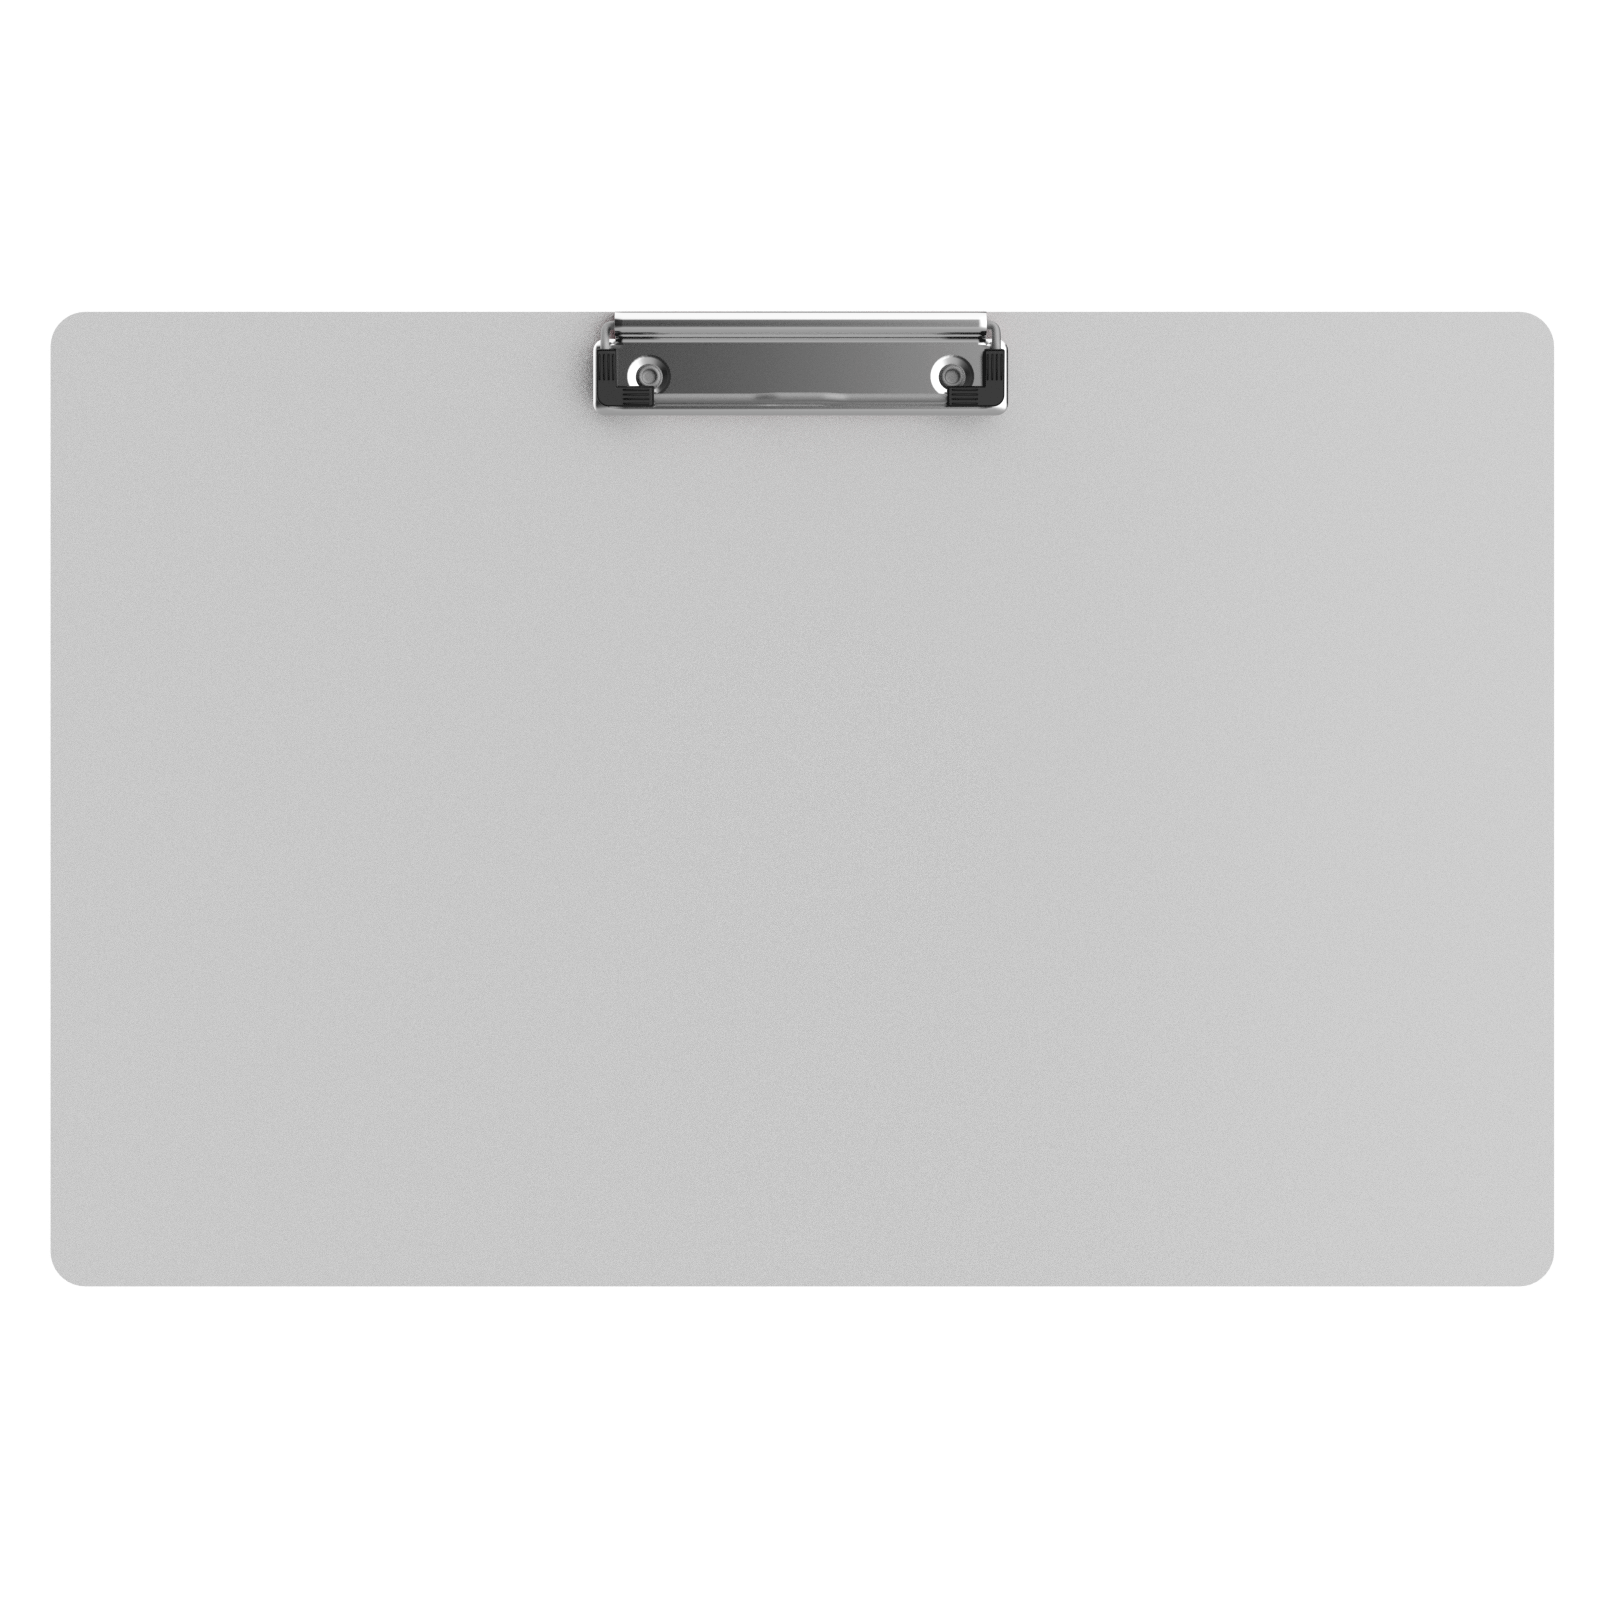 Ledger Clipboard 19 X 11 - Mdf For 11X17 Legal Size With Large Clip Extra  Writing Space For Your (1 Pack) 